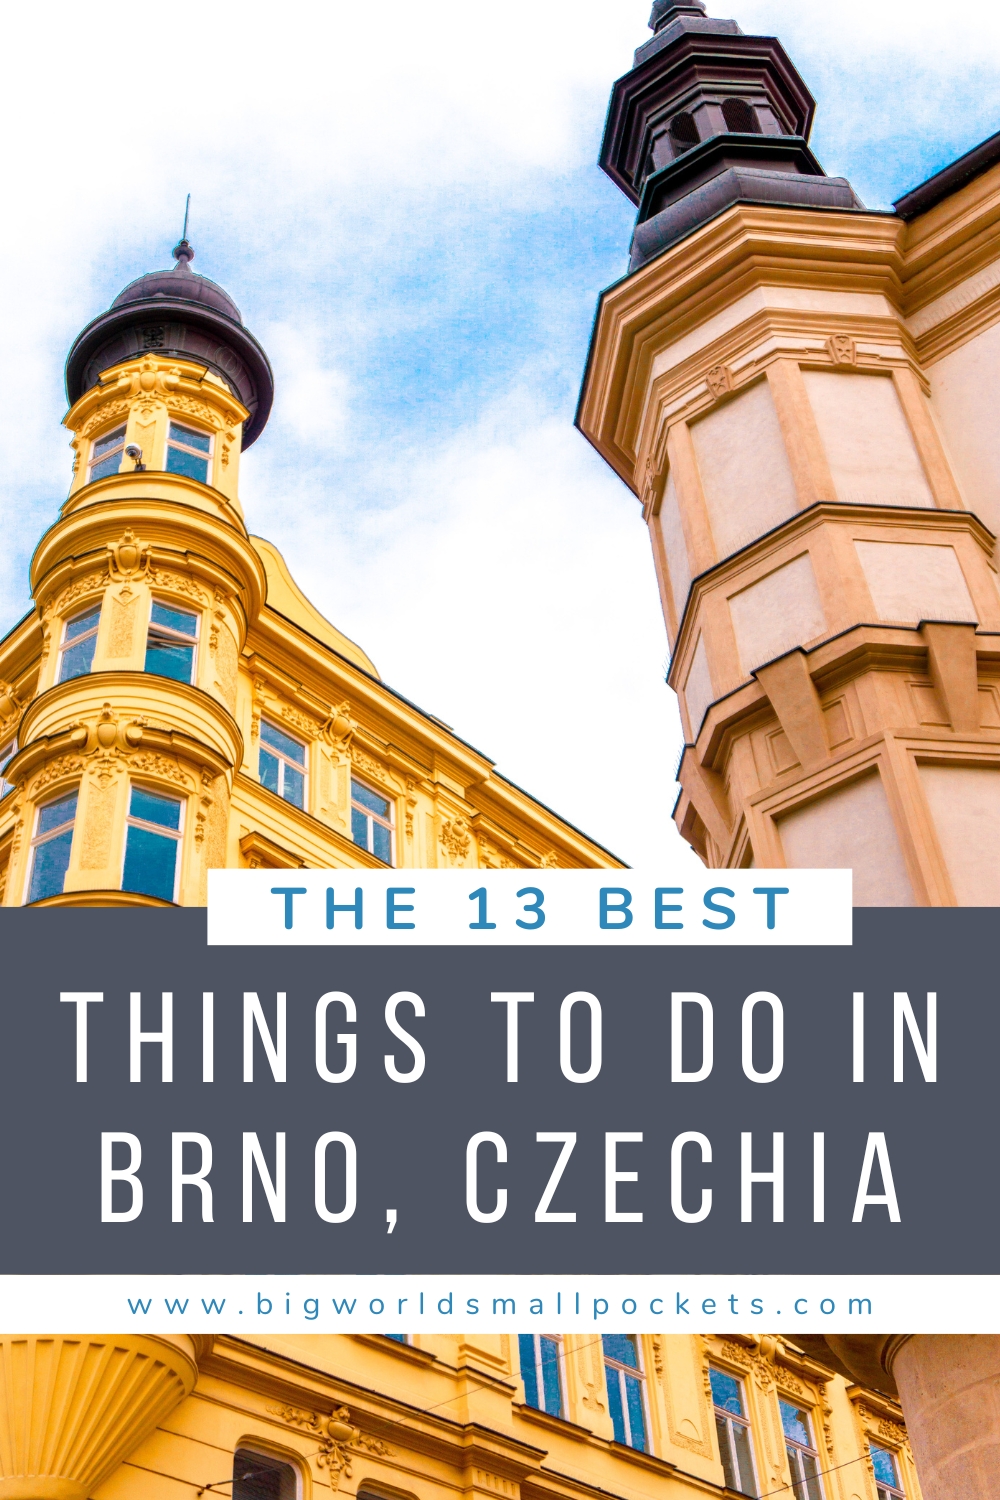 Top 13 Things to Do in Brno, Czech Republic